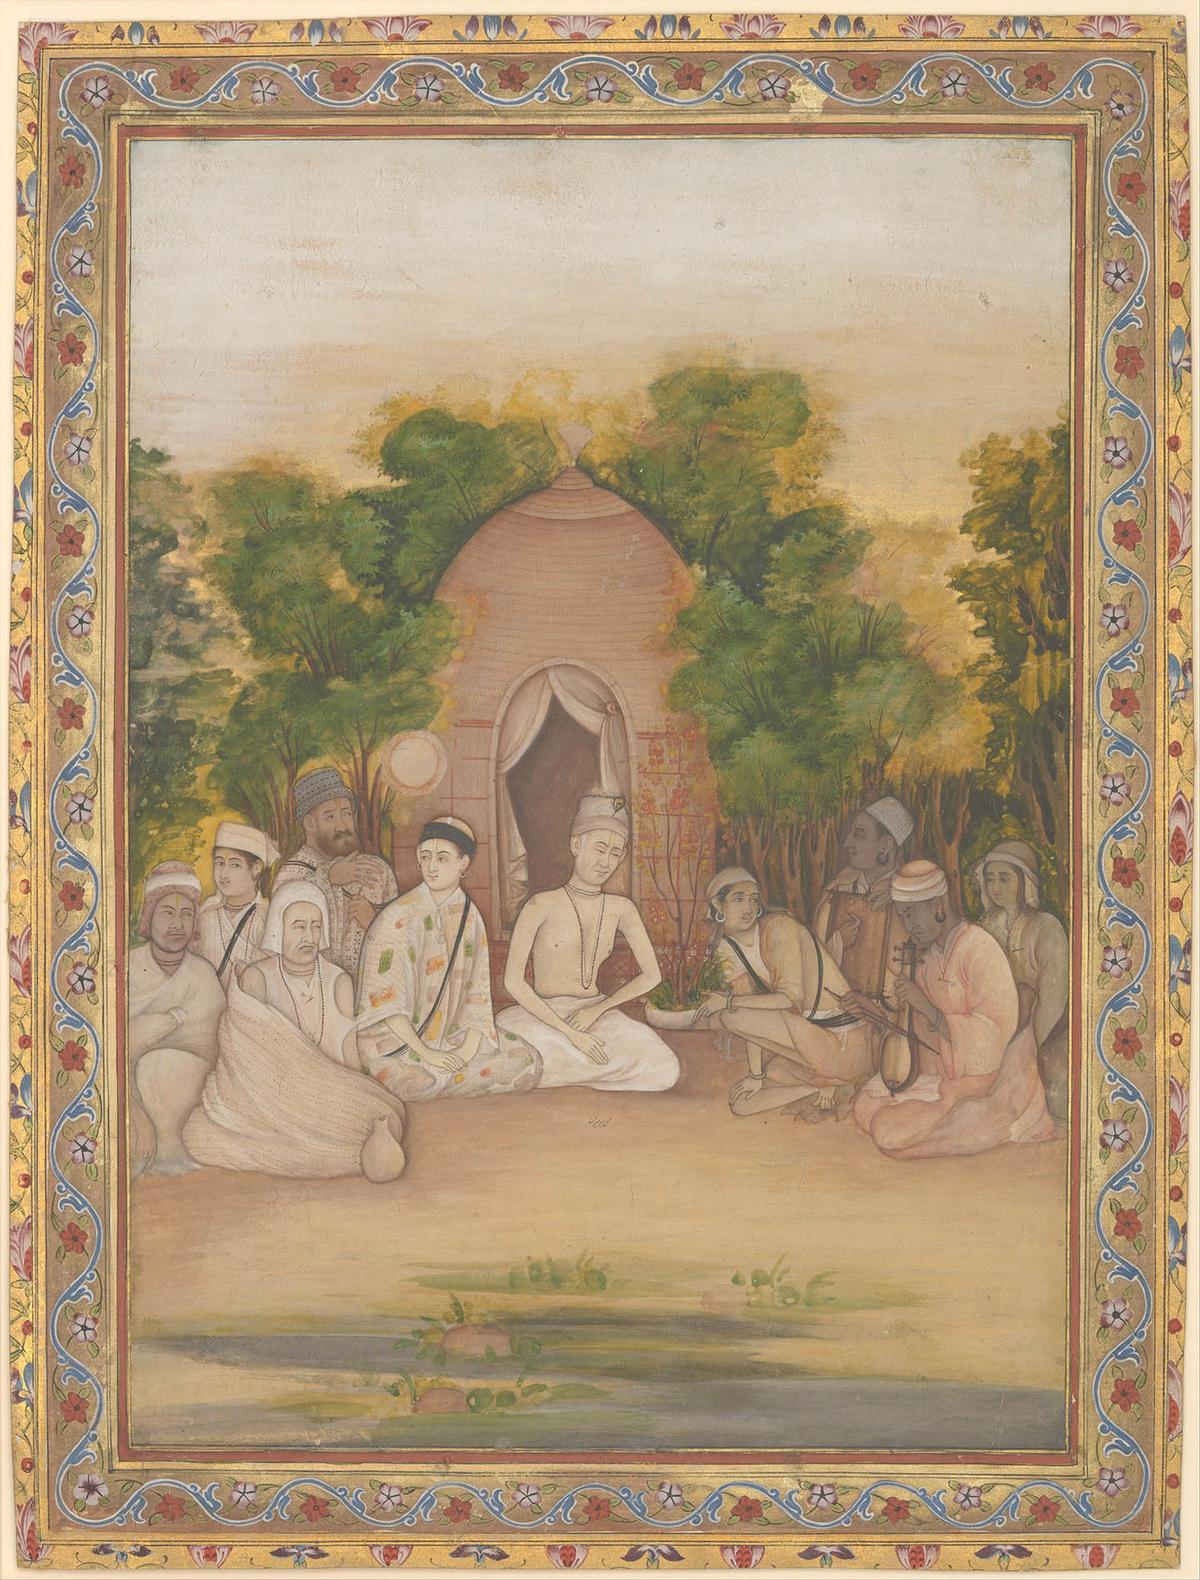 "A Gathering of Holy Men of Different Faiths," circa 1770–1775, by Mir Kalan Khan. Watercolor and gold on paper. The Metropolitan Museum of Art, New York. (Public Domain)